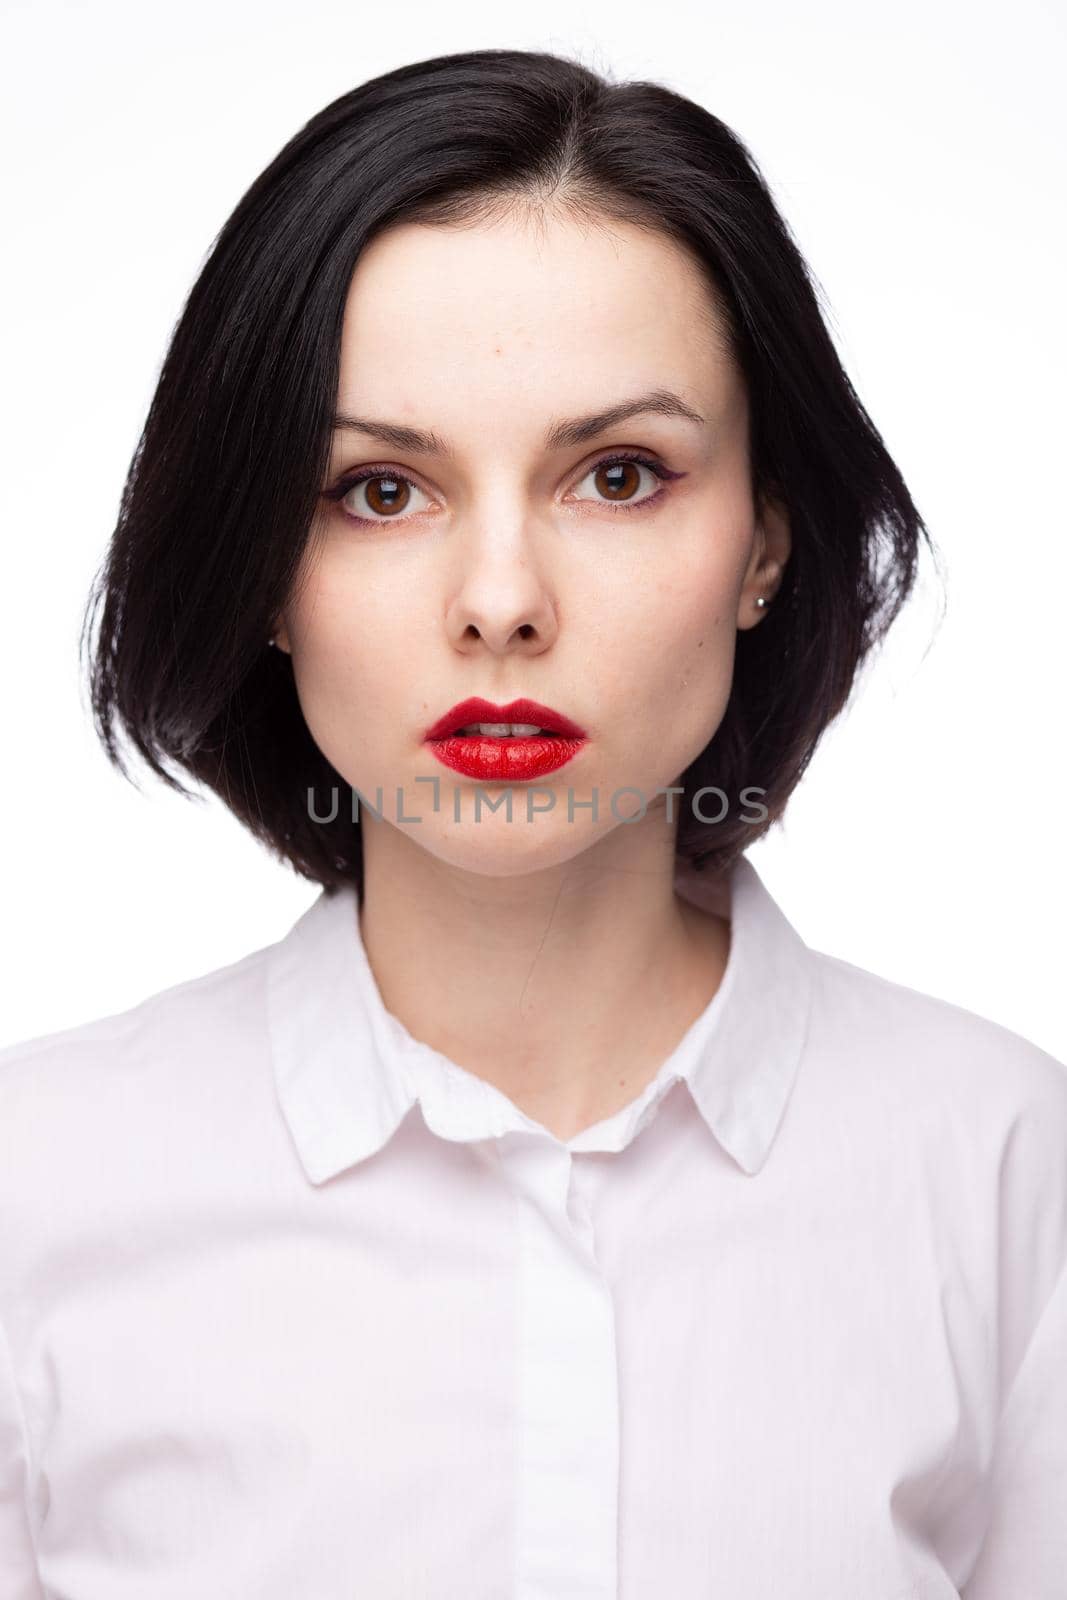 brunette woman with red lipstick on her lips in white shirt, white background. High quality photo